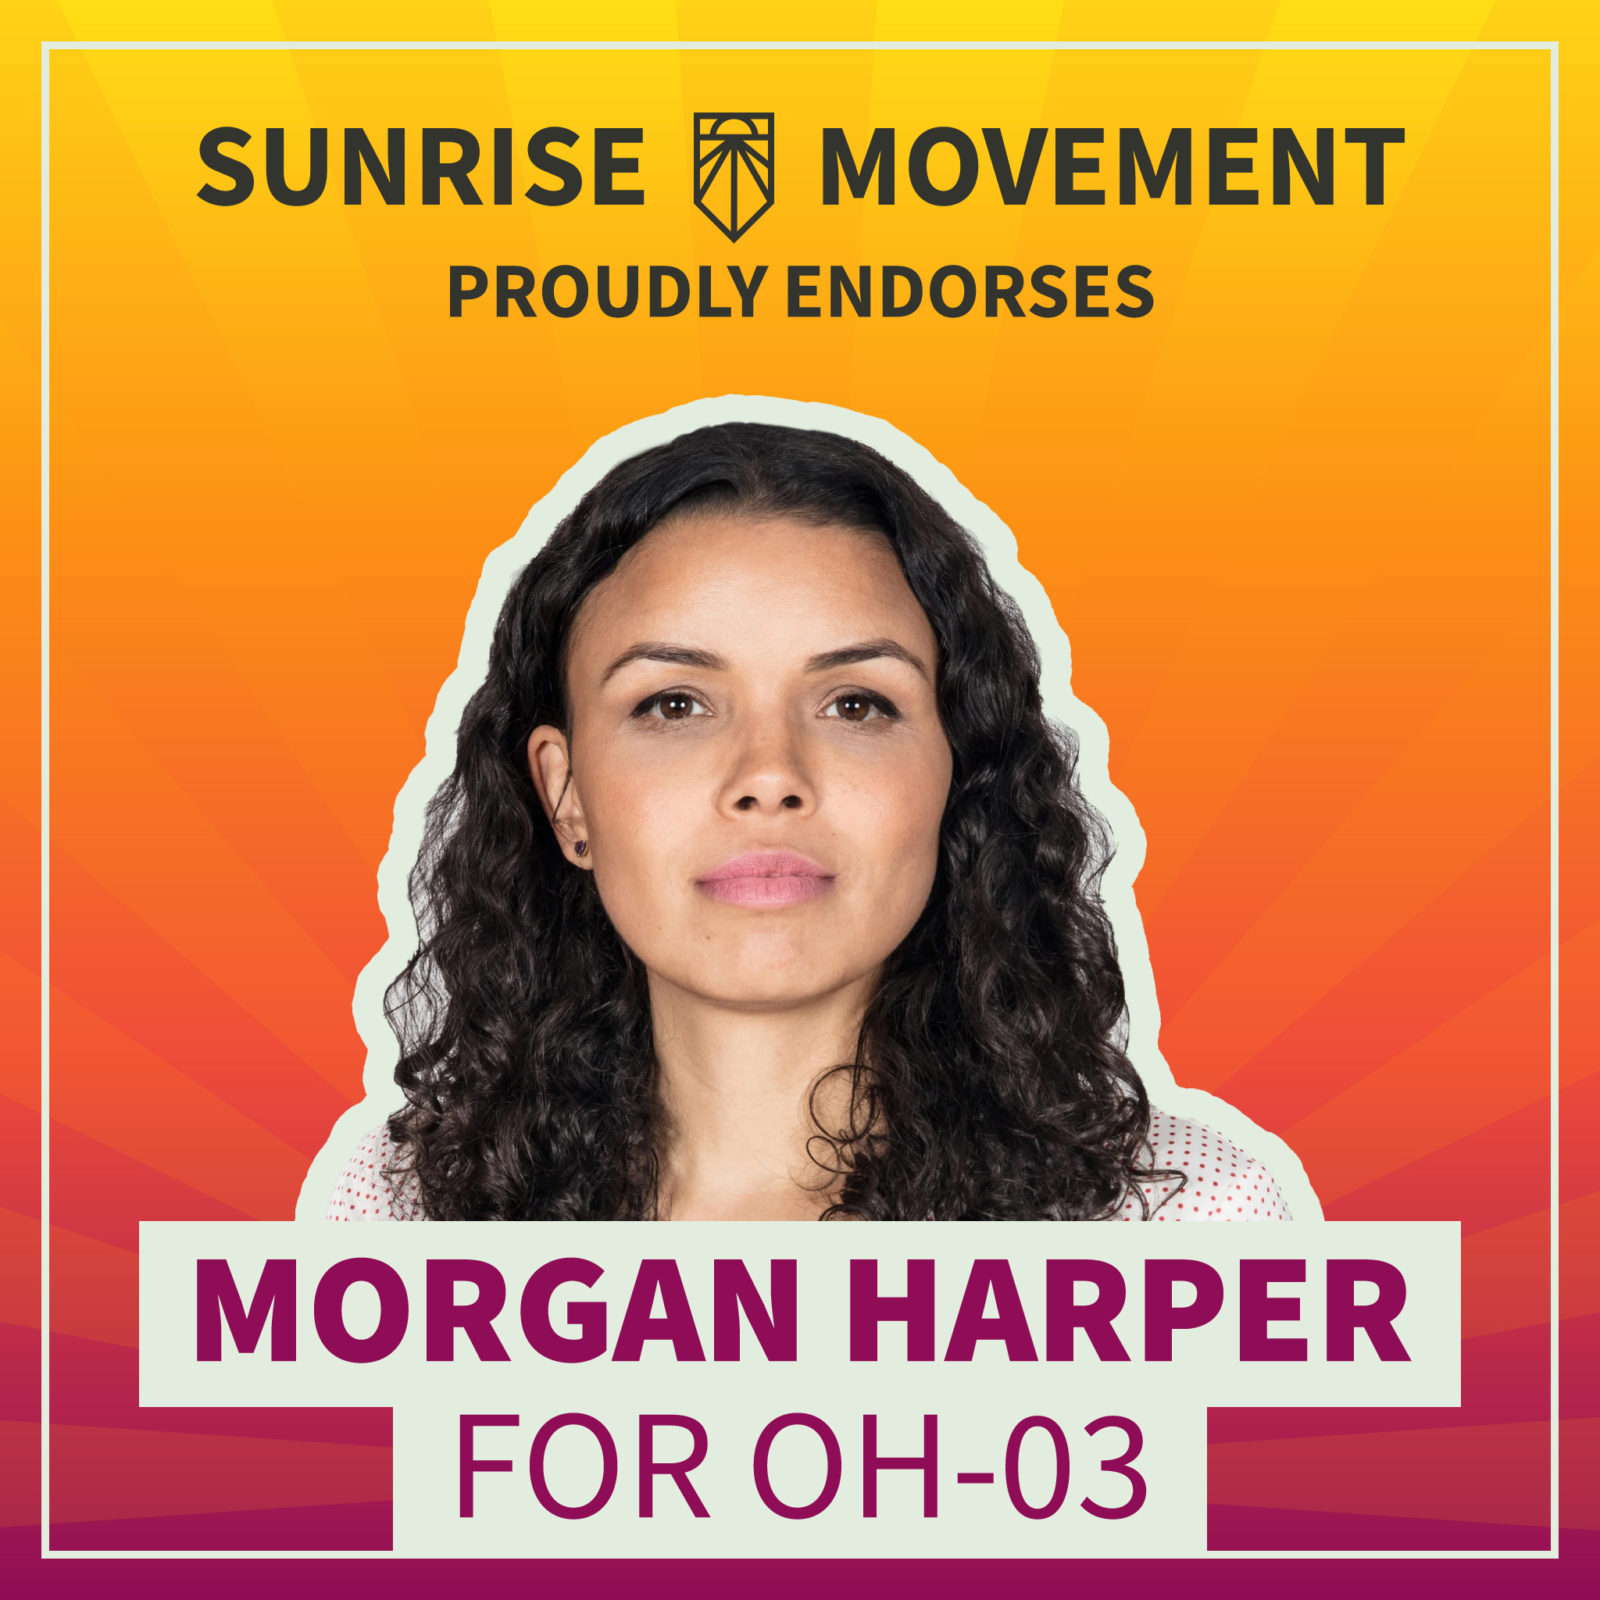 A photo of Morgan Harper with text: Sunrise Movement proudly endorses Morgan Harper for OH-03